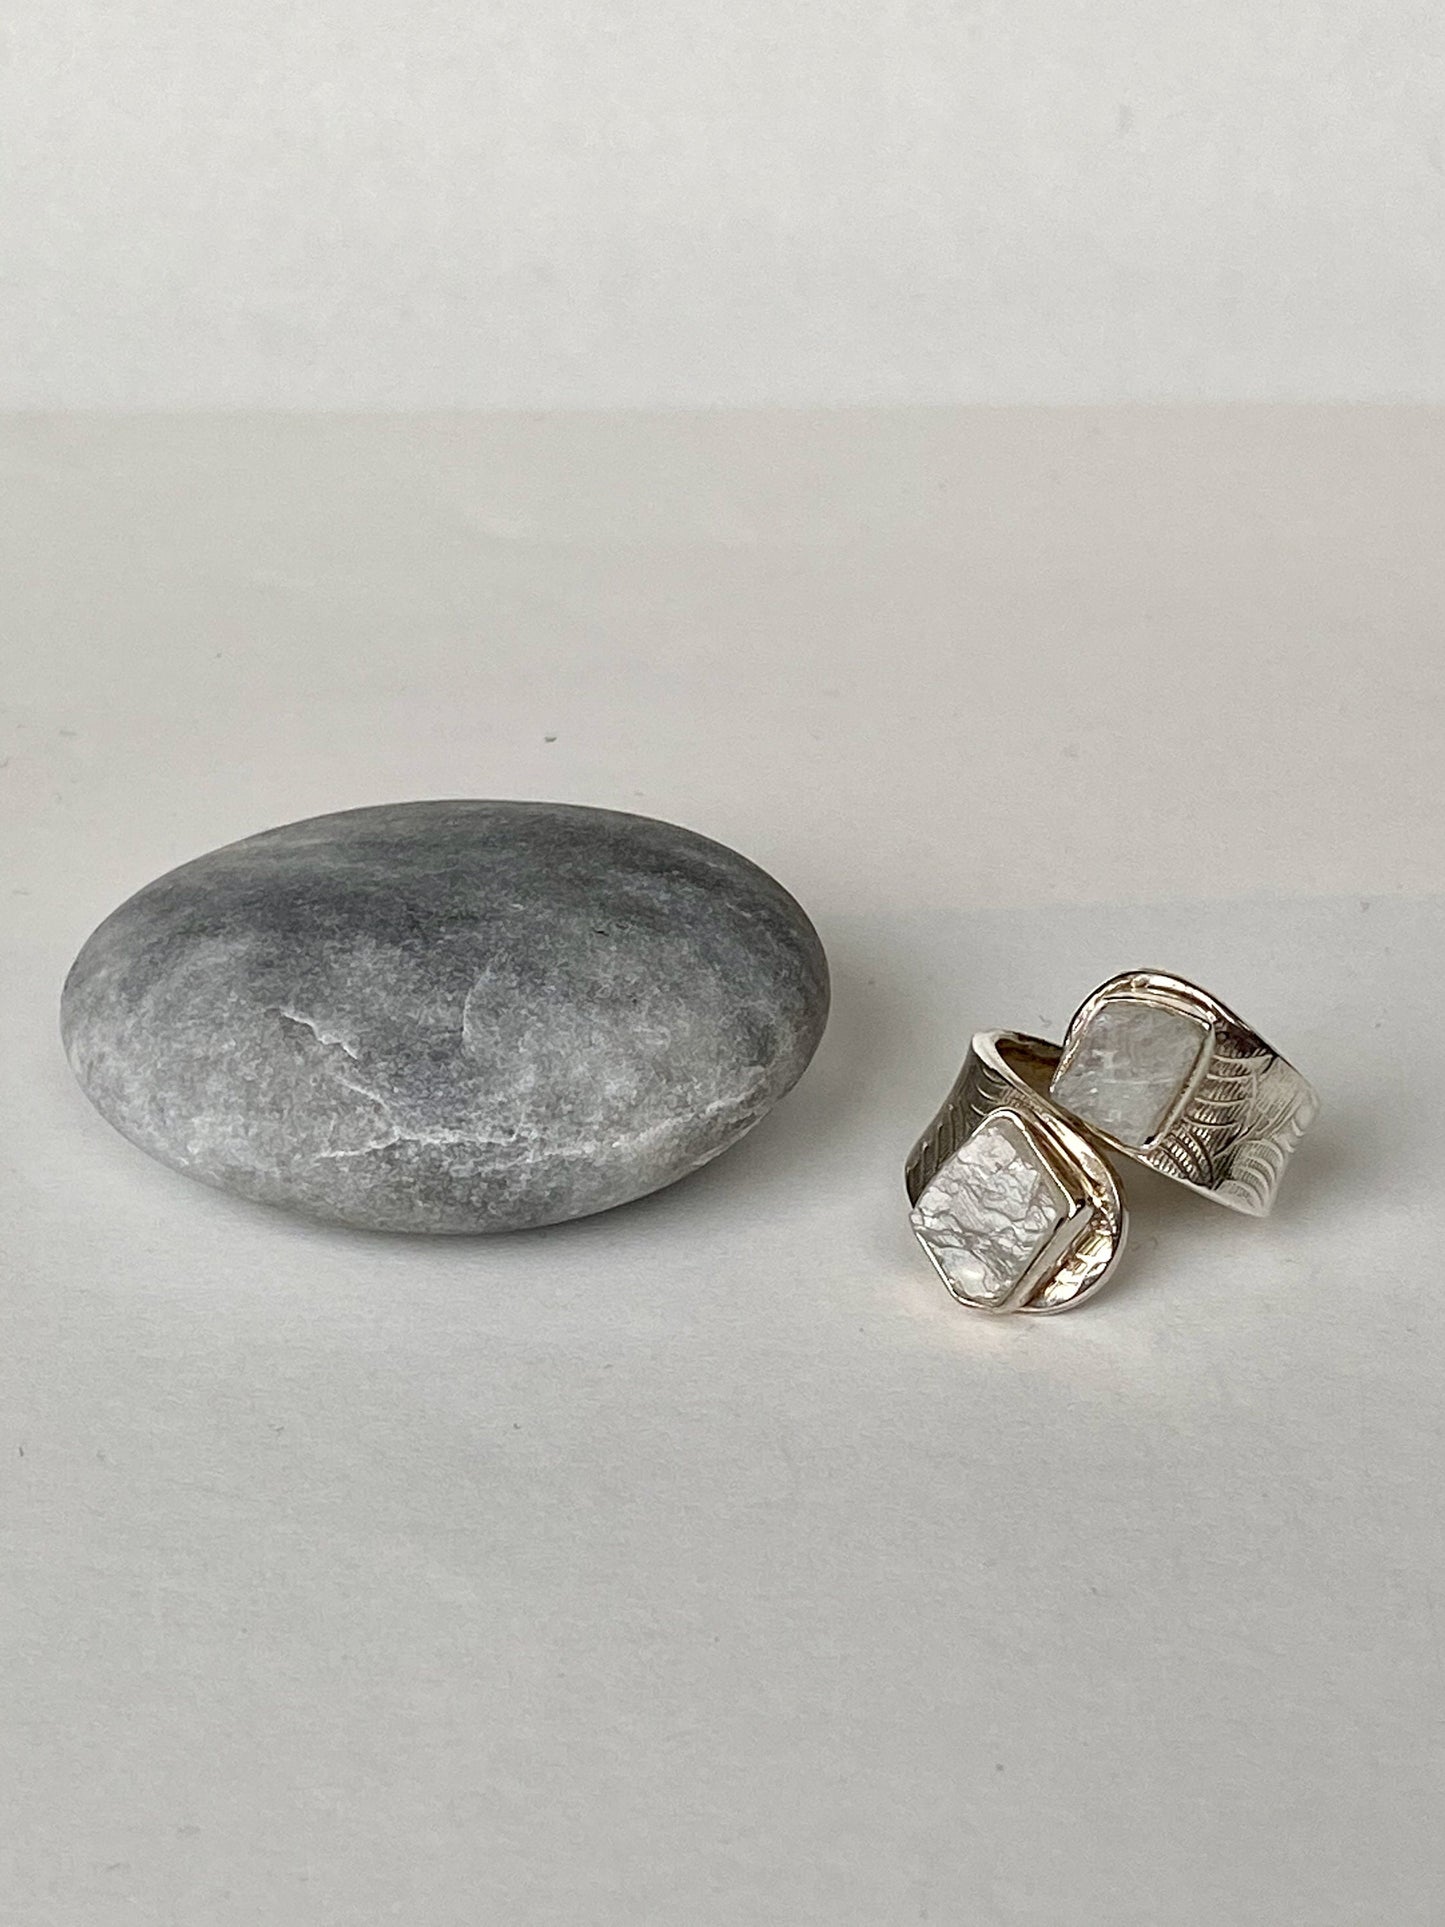 Handmade all size gorgeous Herkimer diamond and sterling silver ring.